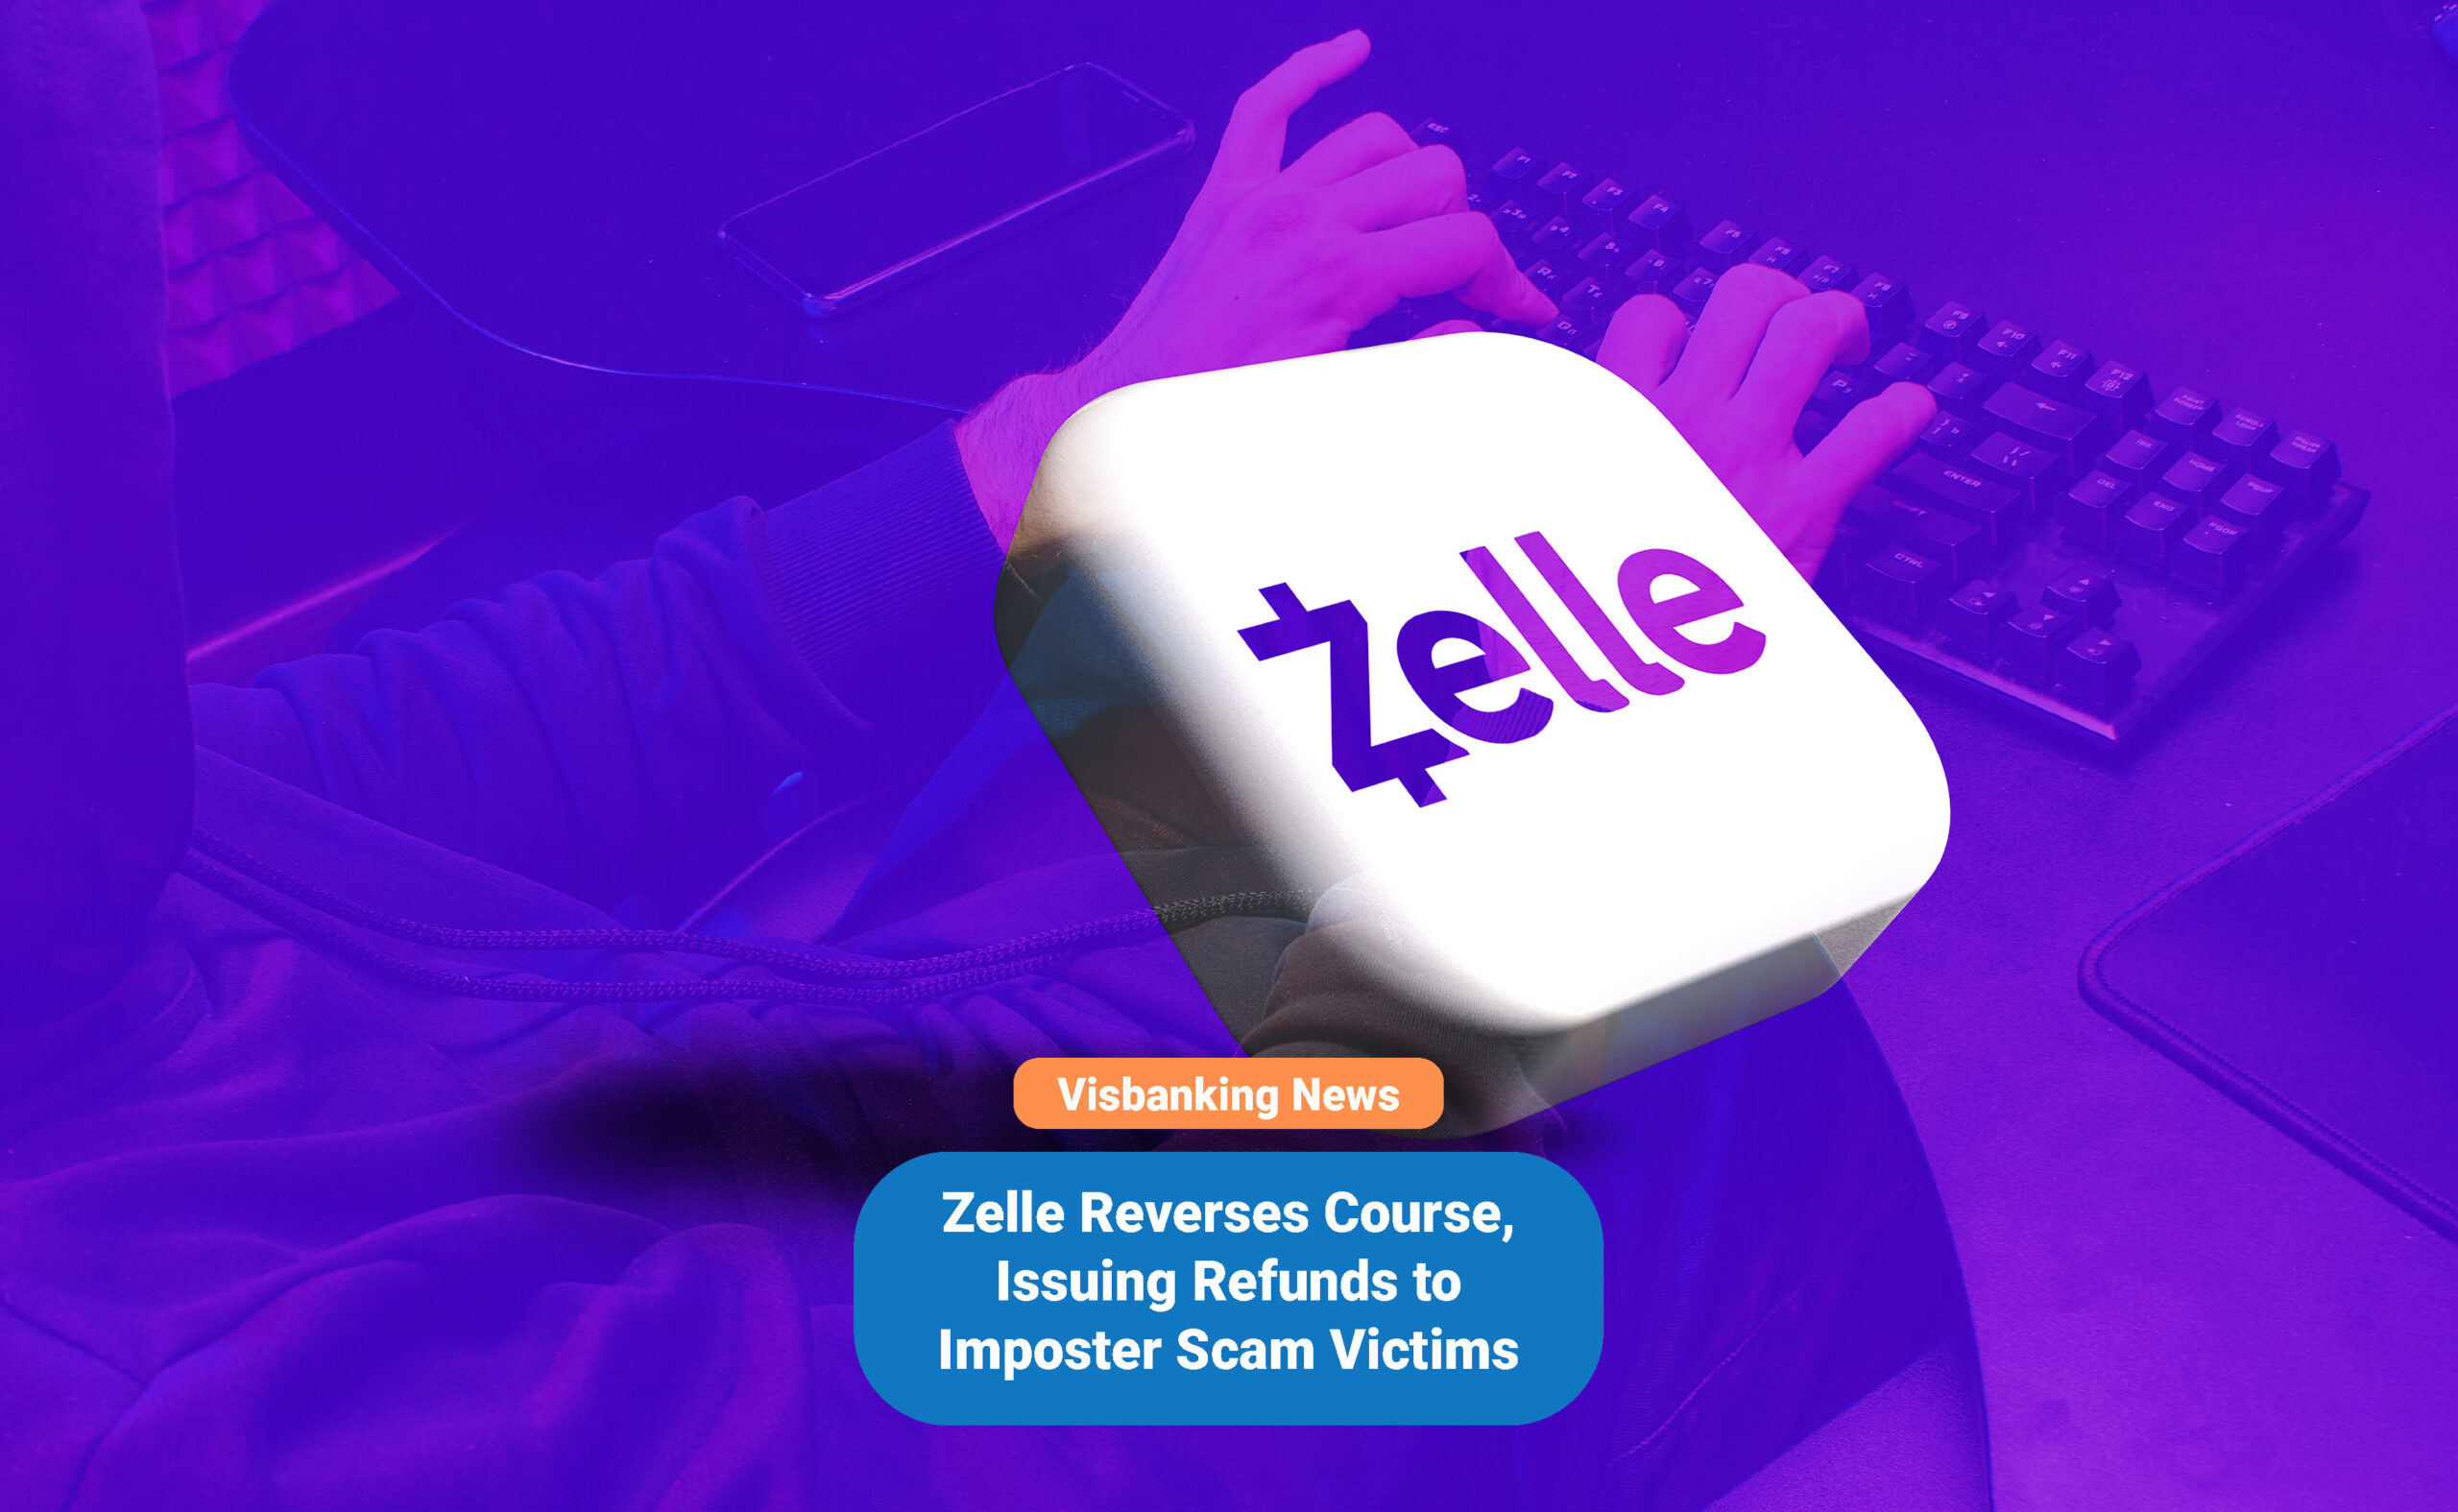 Zelle Reverses Course, Issuing Refunds to Imposter Scam Victims